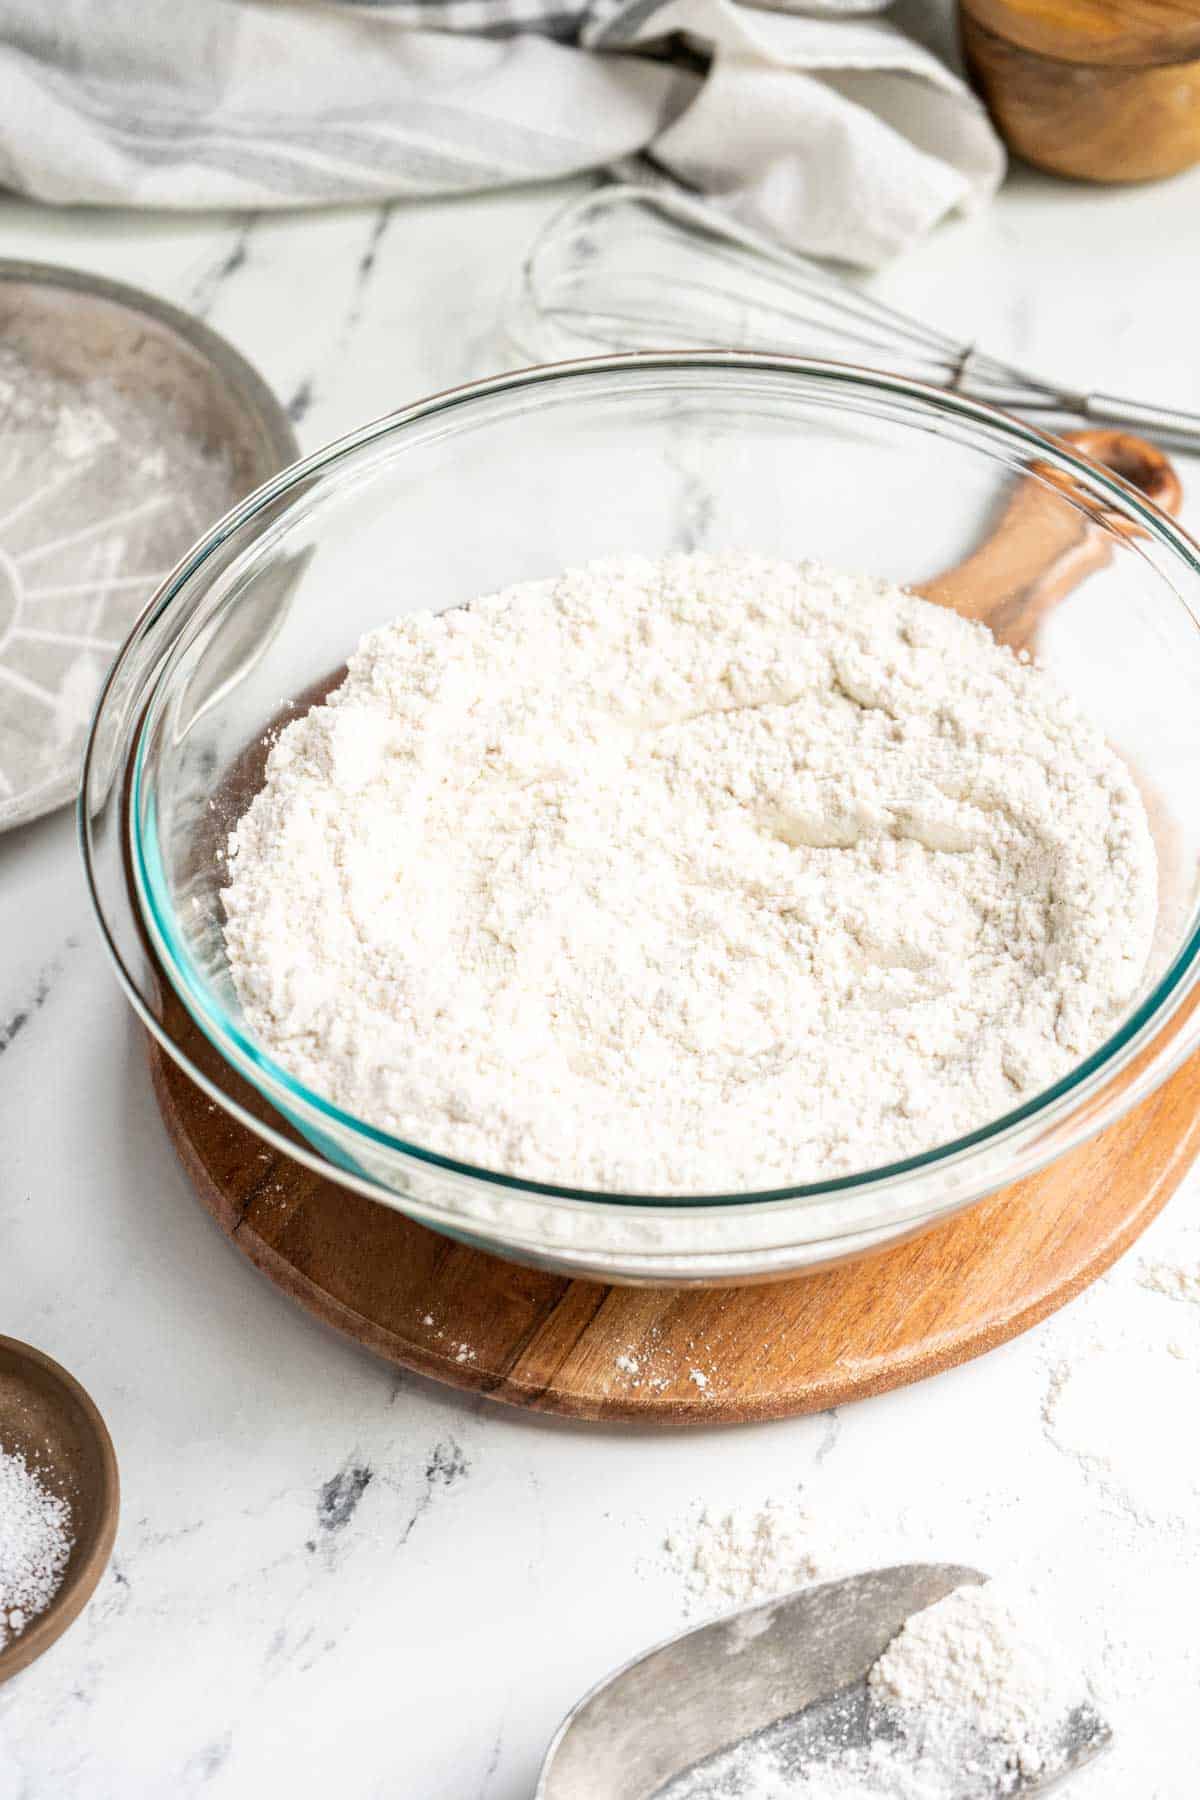 Flour in a bowl on a counter.